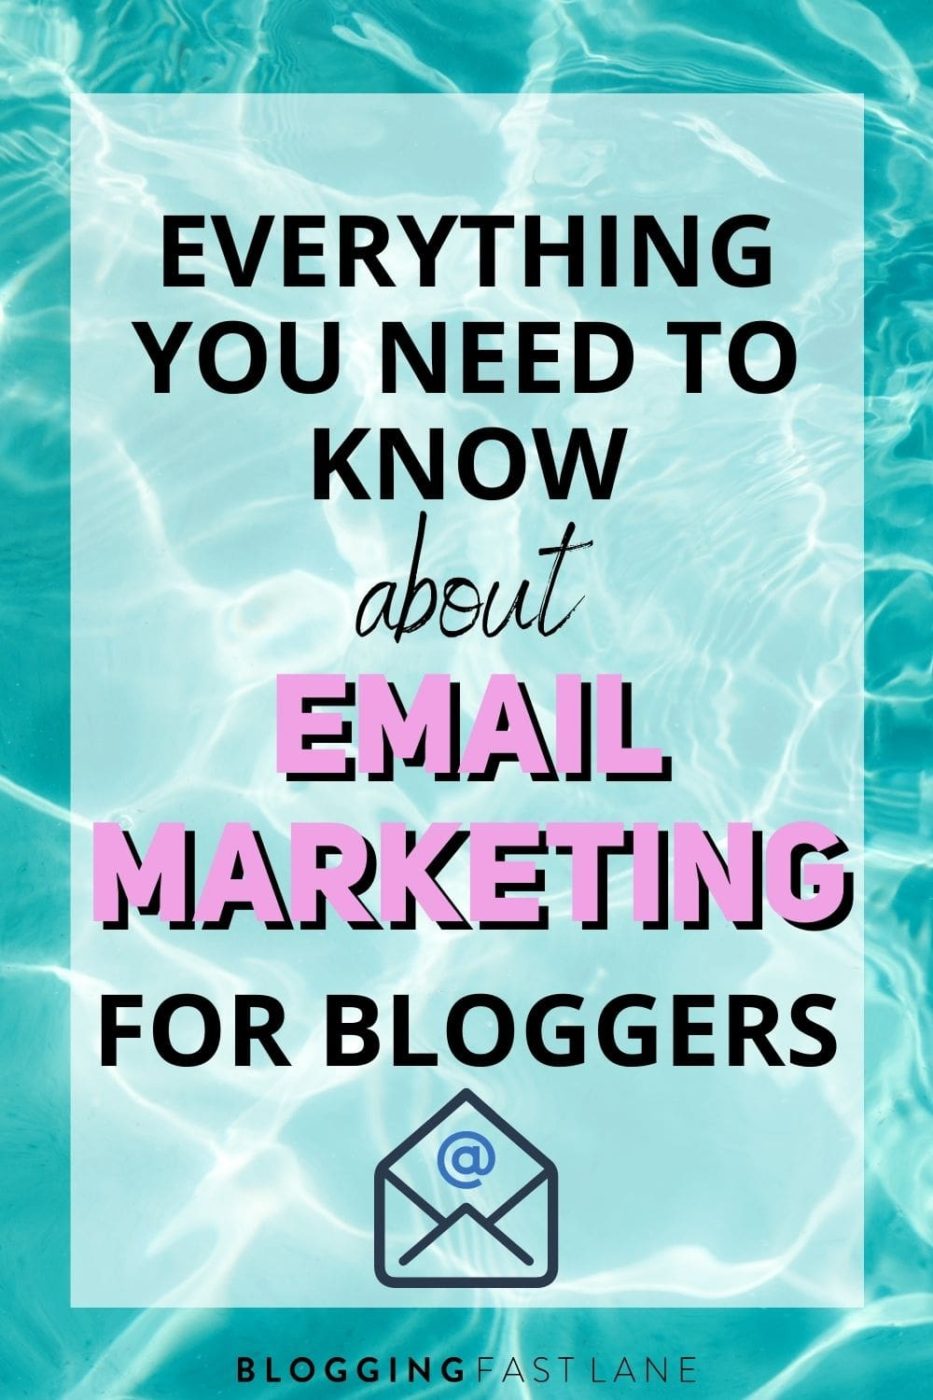 Email Marketing for Bloggers | Email marketing is one of the best ways to connect with your audience, drive traffic to your blog and boost your income. Click here to learn everything you need to know about email marketing for bloggers today! #blogging #emailmarketing #passiveincome